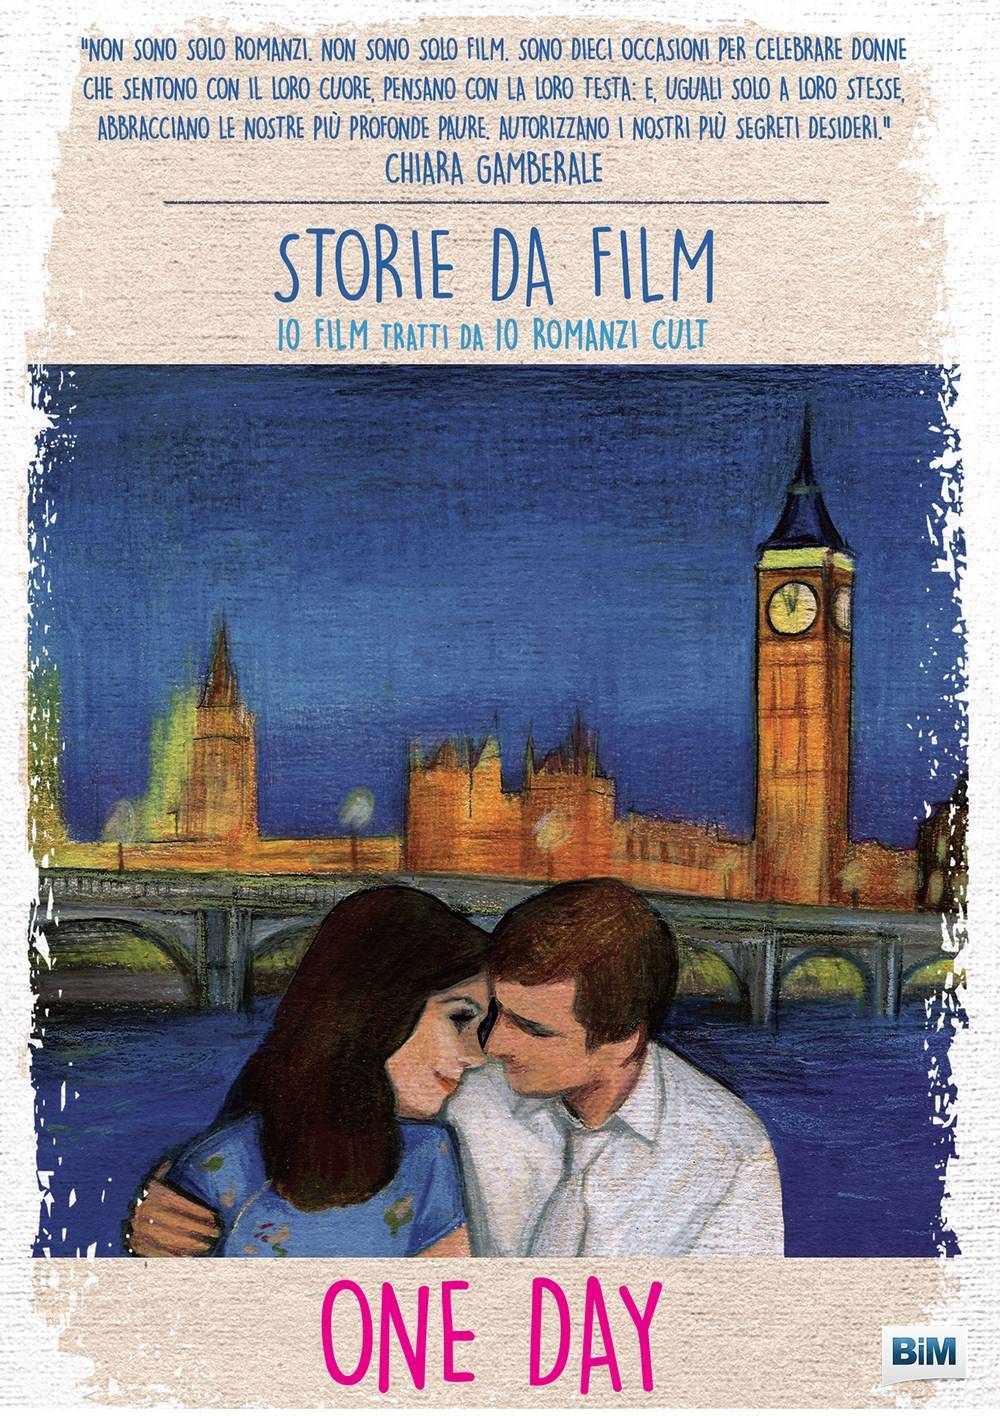 FRONT_STORIE FILM_oneday